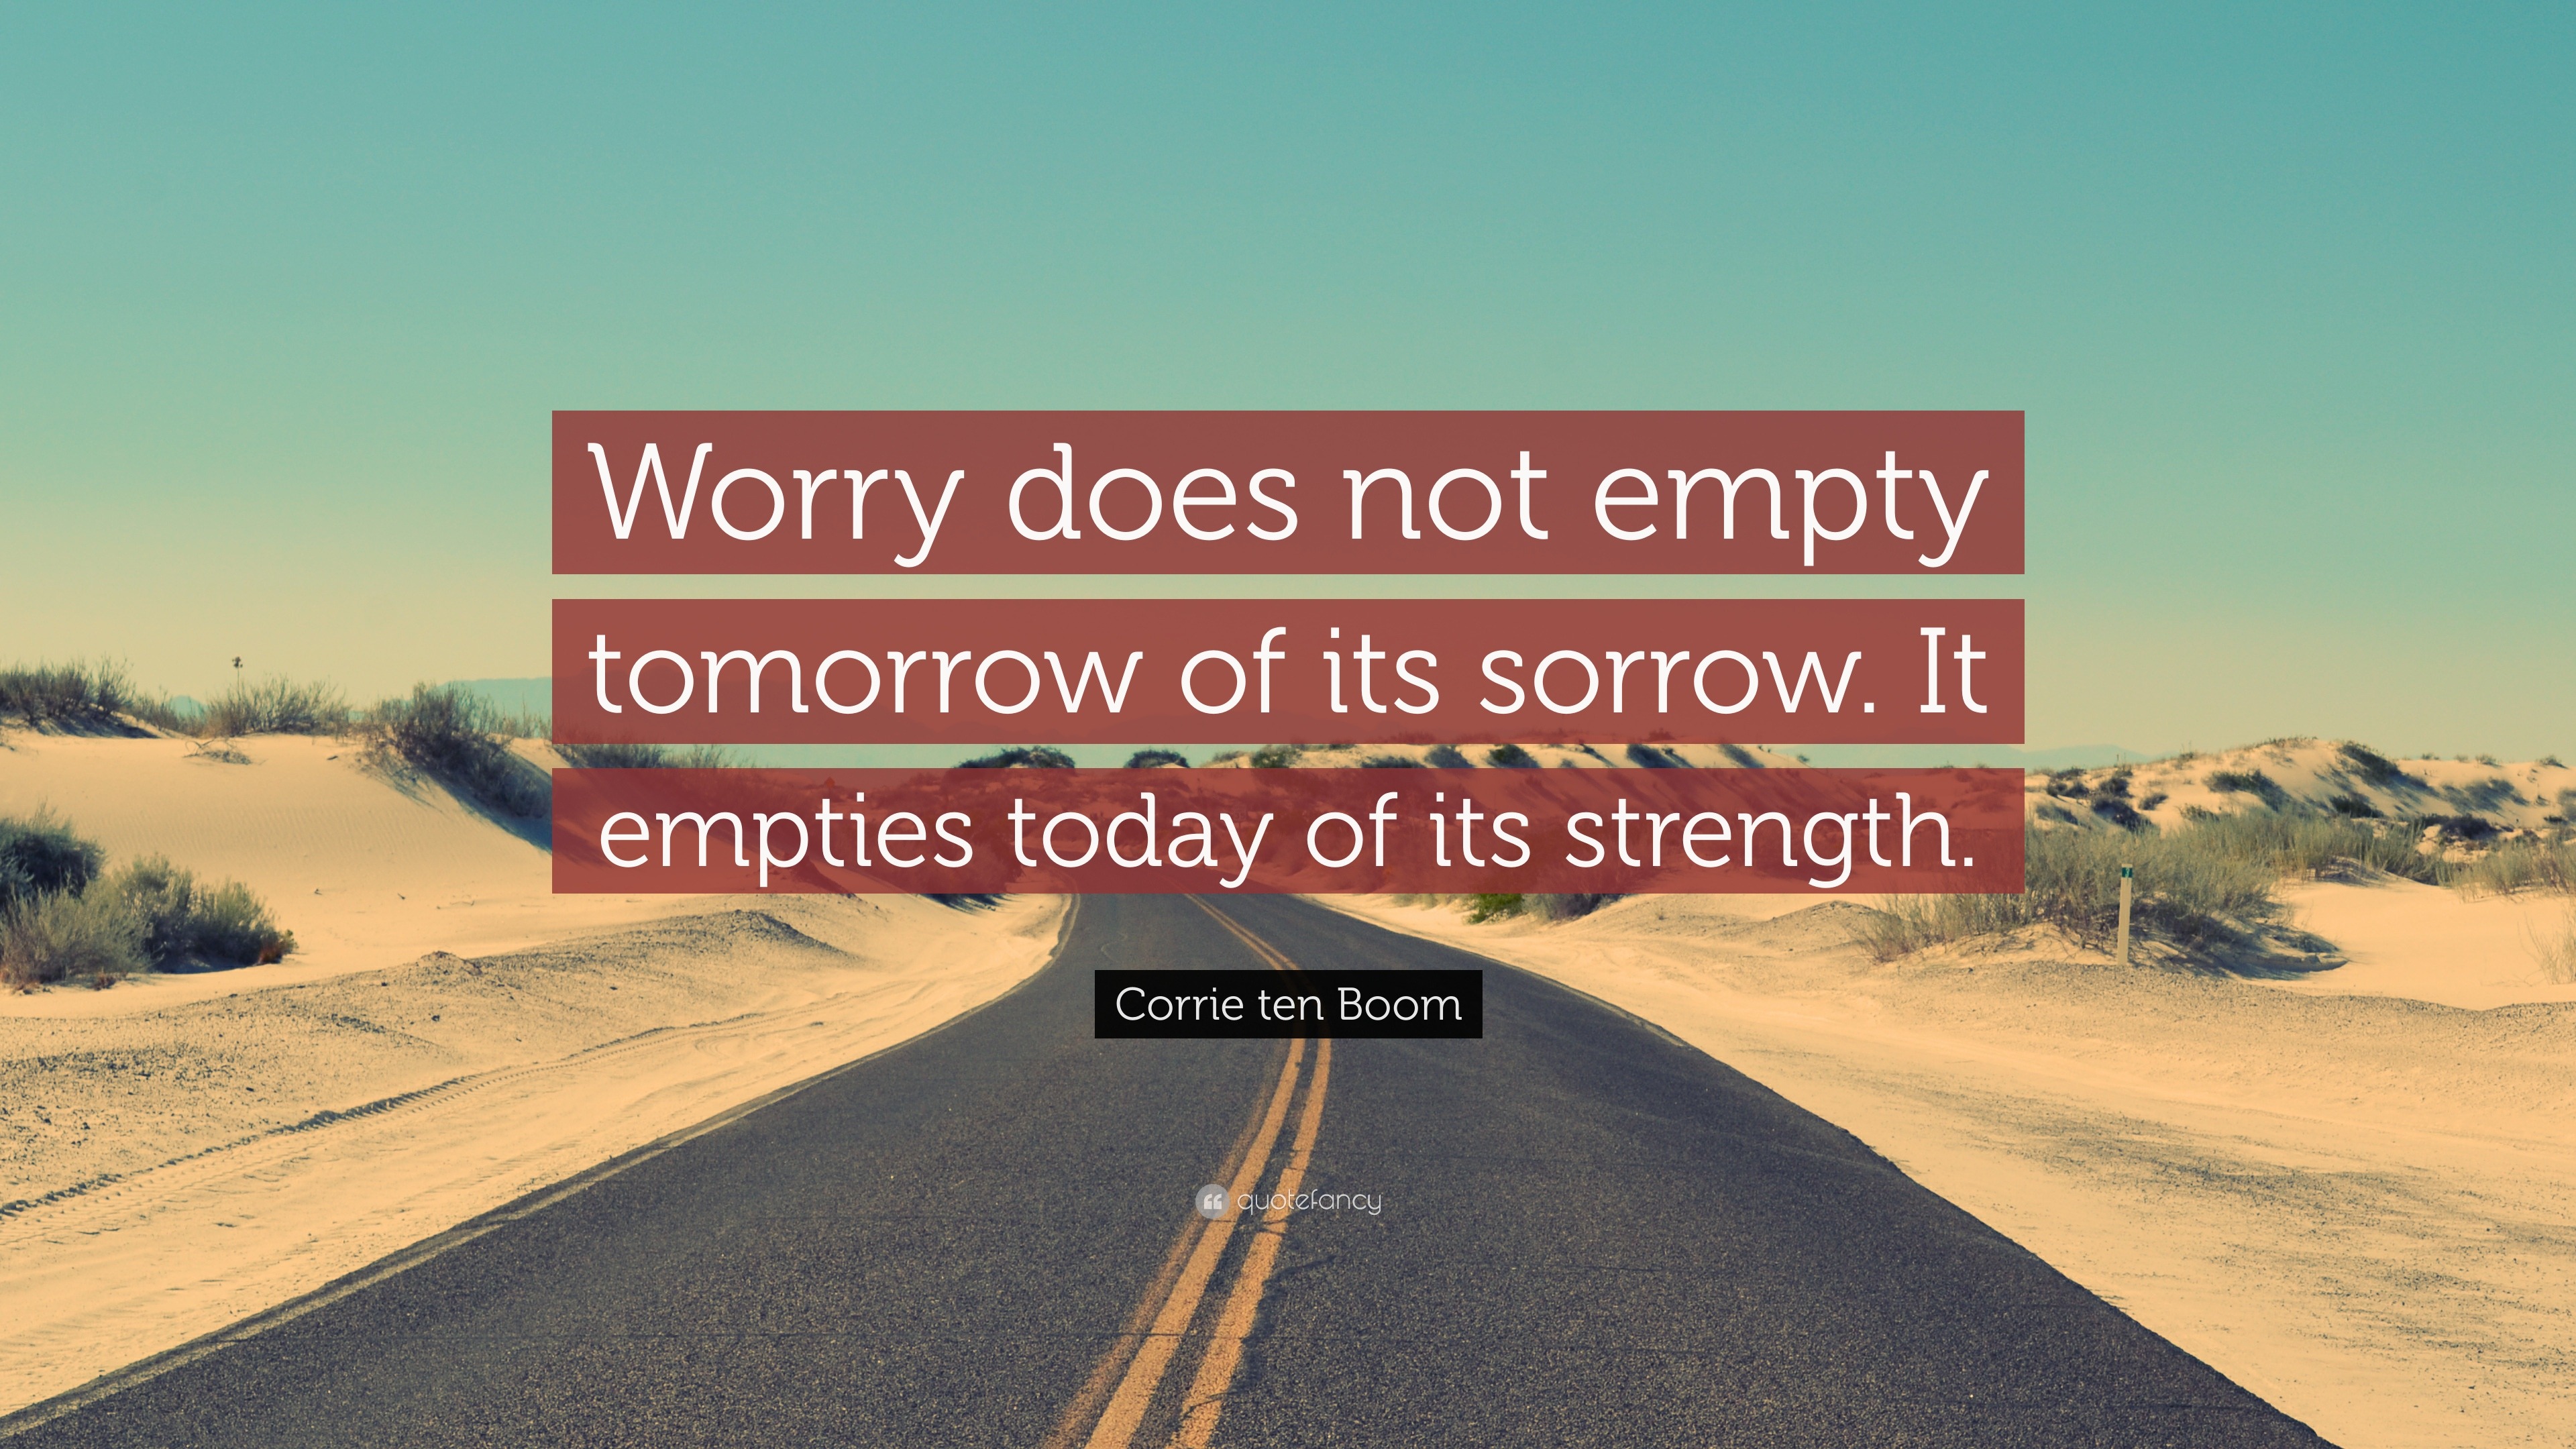 Corrie Ten Boom - Worry does not empty tomorrow of its